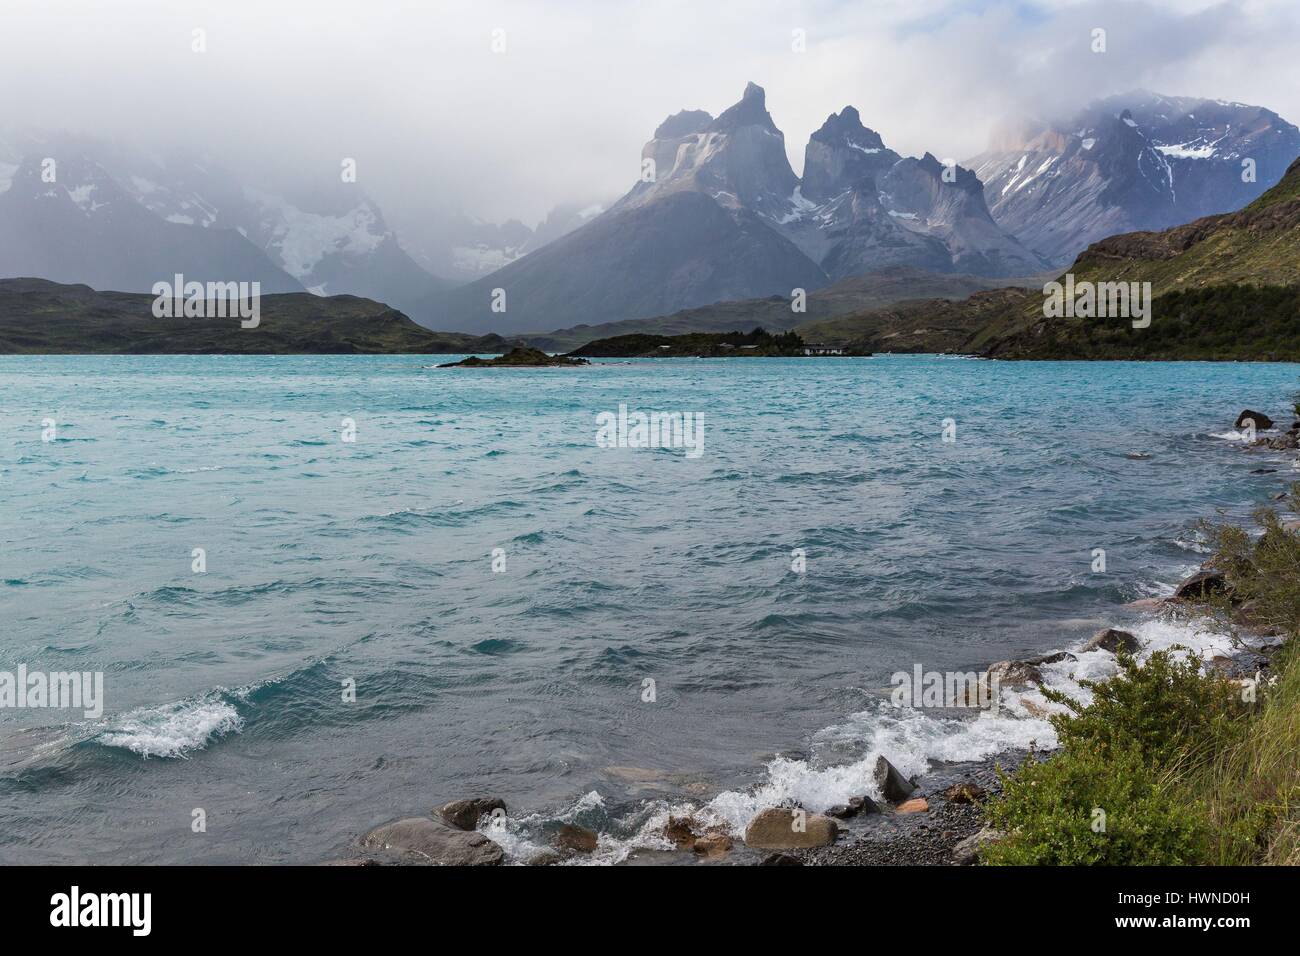 Chile, Patagonia, Aysen region, Torres del Paine national park Stock Photo